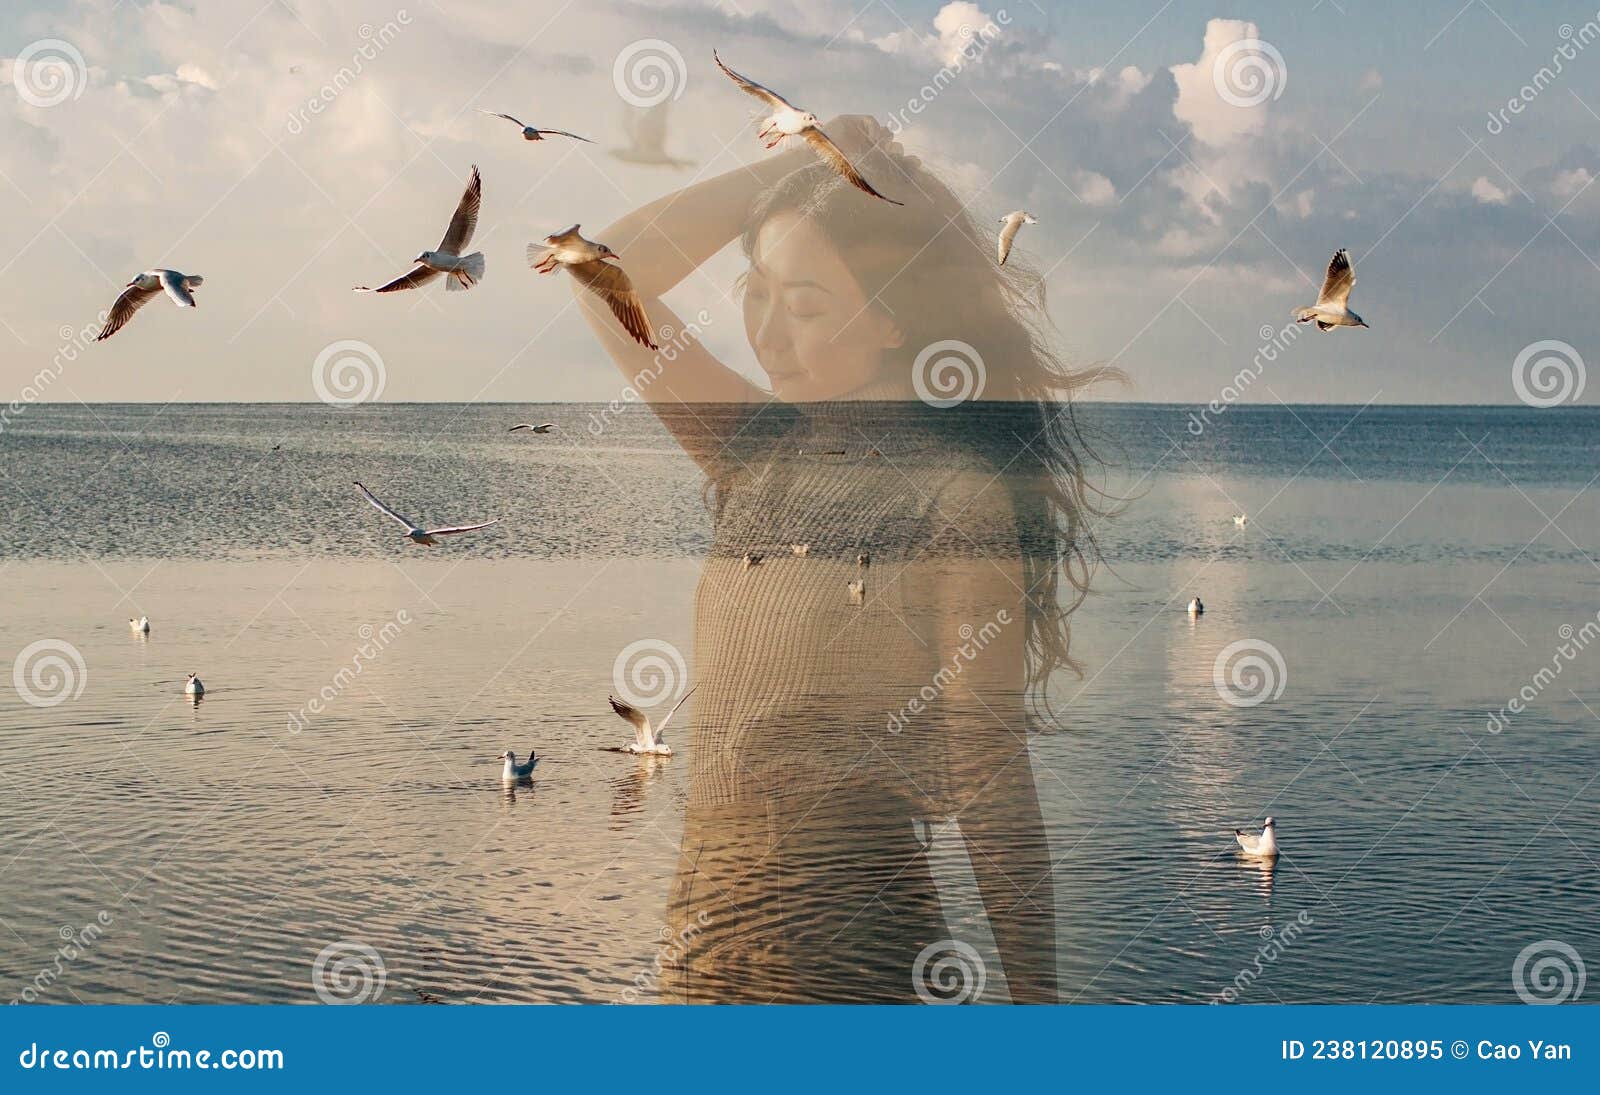 https://thumbs.dreamstime.com/z/double-exposure-portrait-young-woman-combined-photograph-flying-bird-sunset-reflecting-ocean-conceptual-image-showing-238120895.jpg